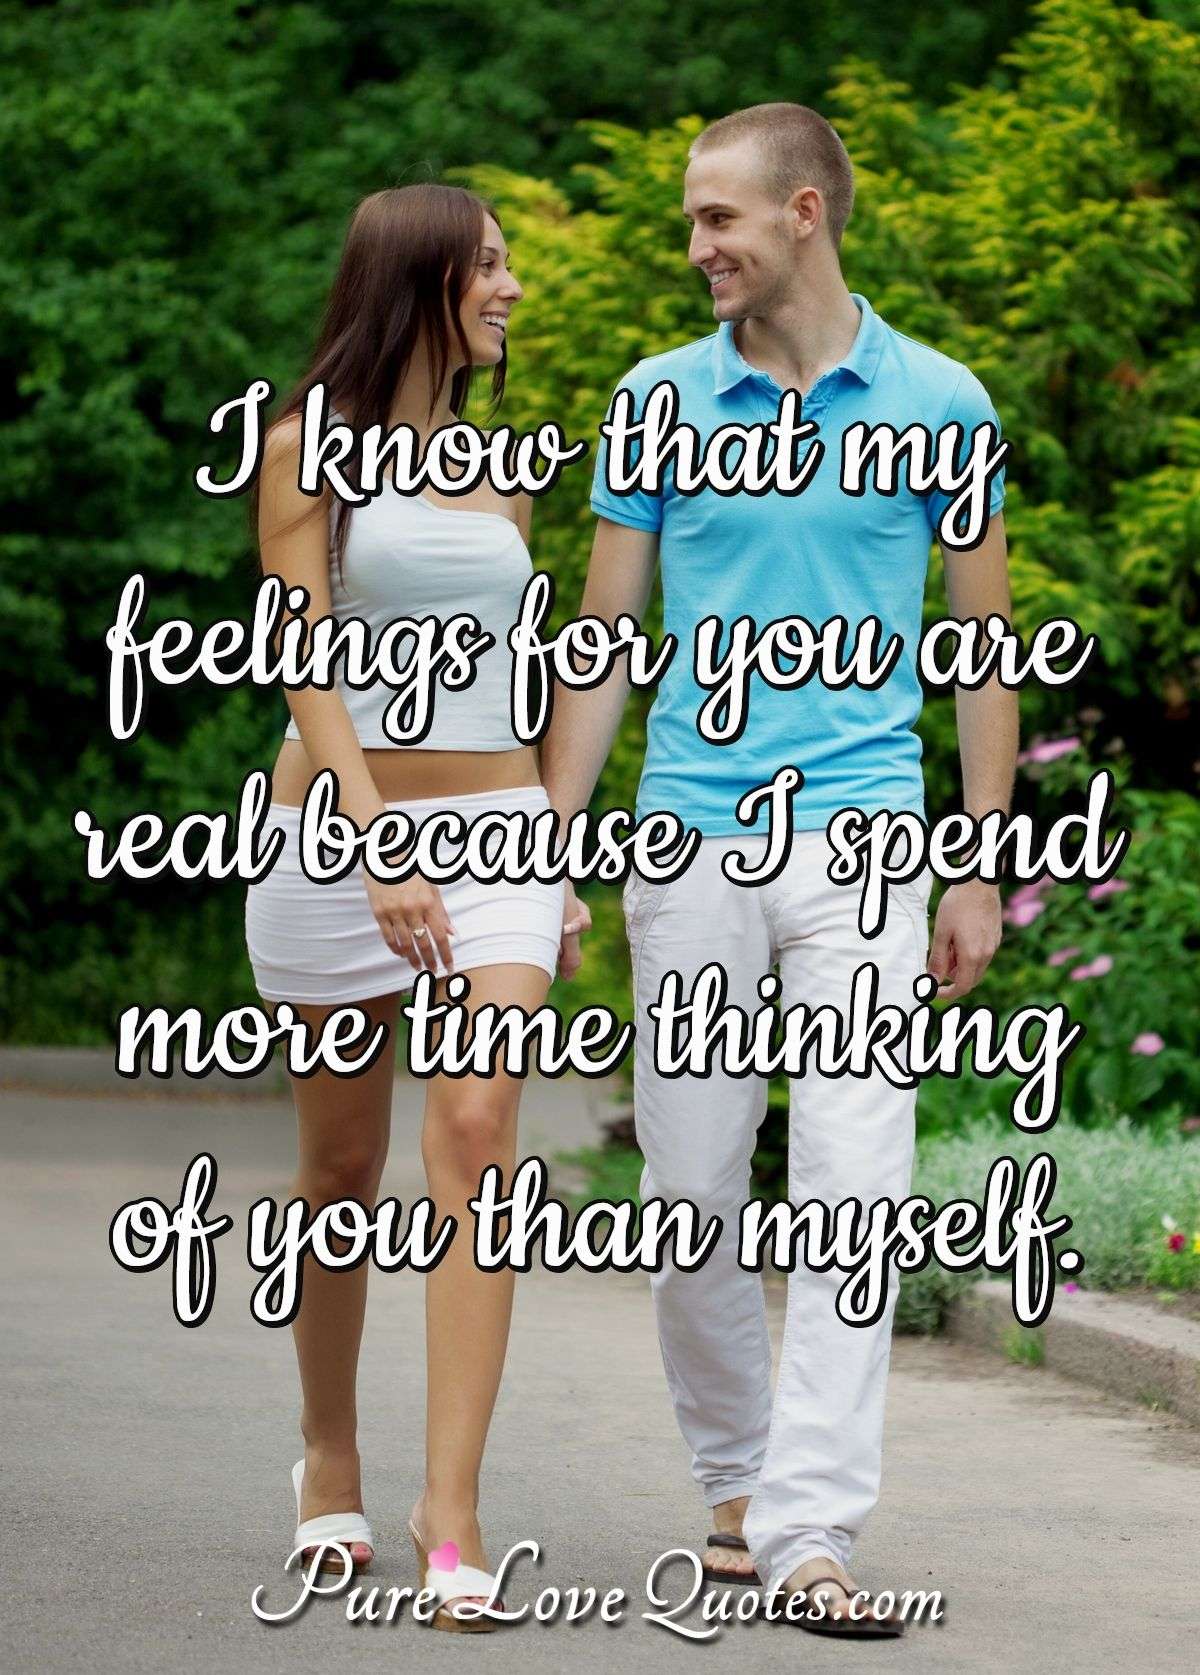 I know that my feelings for you are real because I spend more time thinking of you than myself. - Anonymous